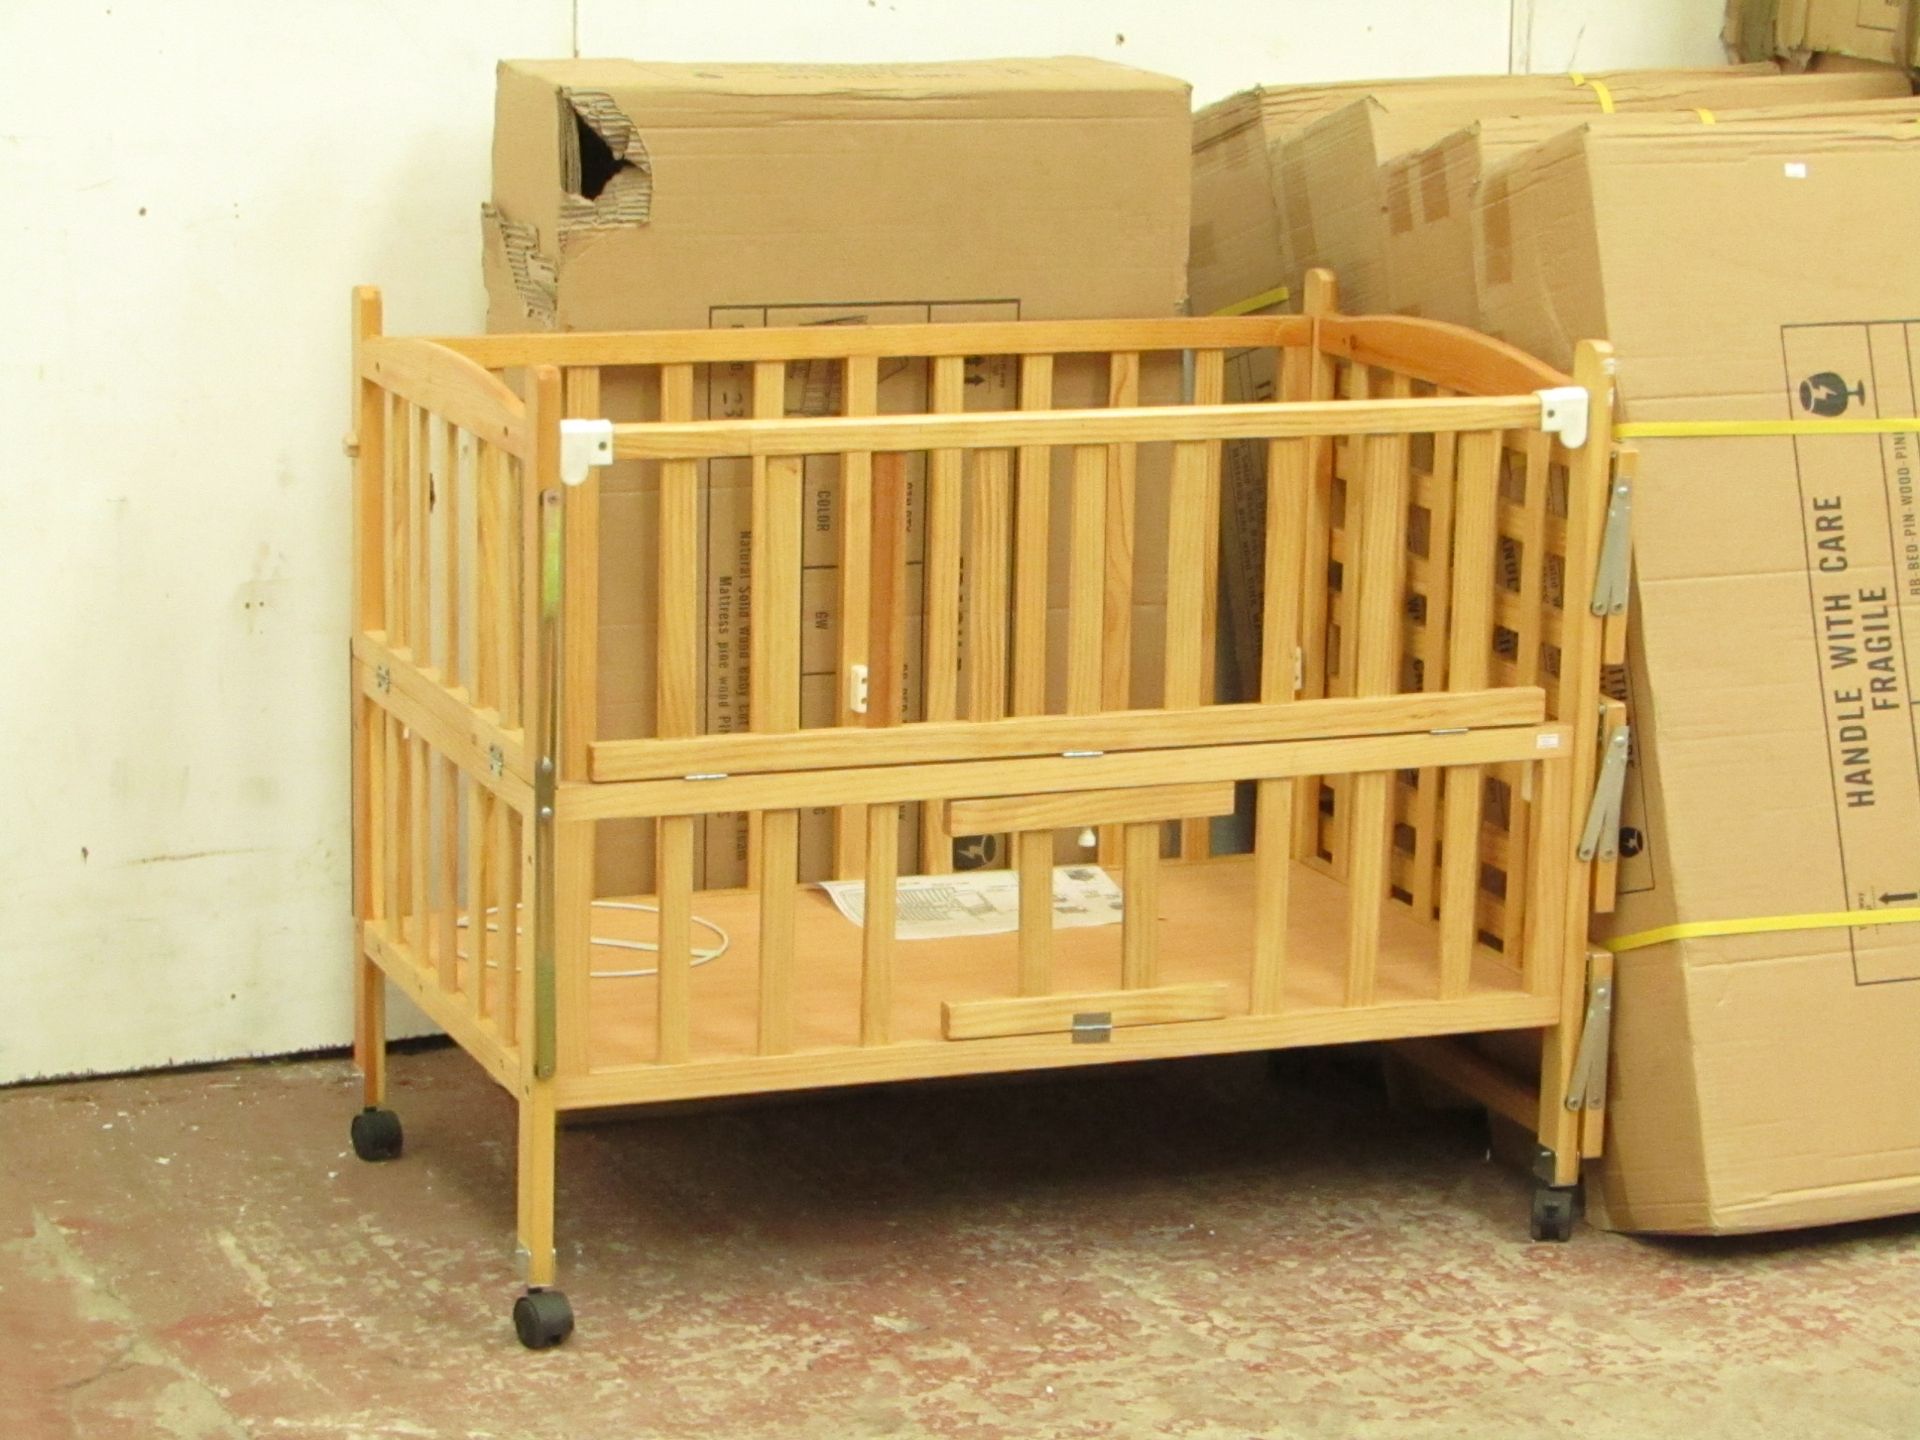 Childs cott with side shelves and Blue mattress, new and boxed.